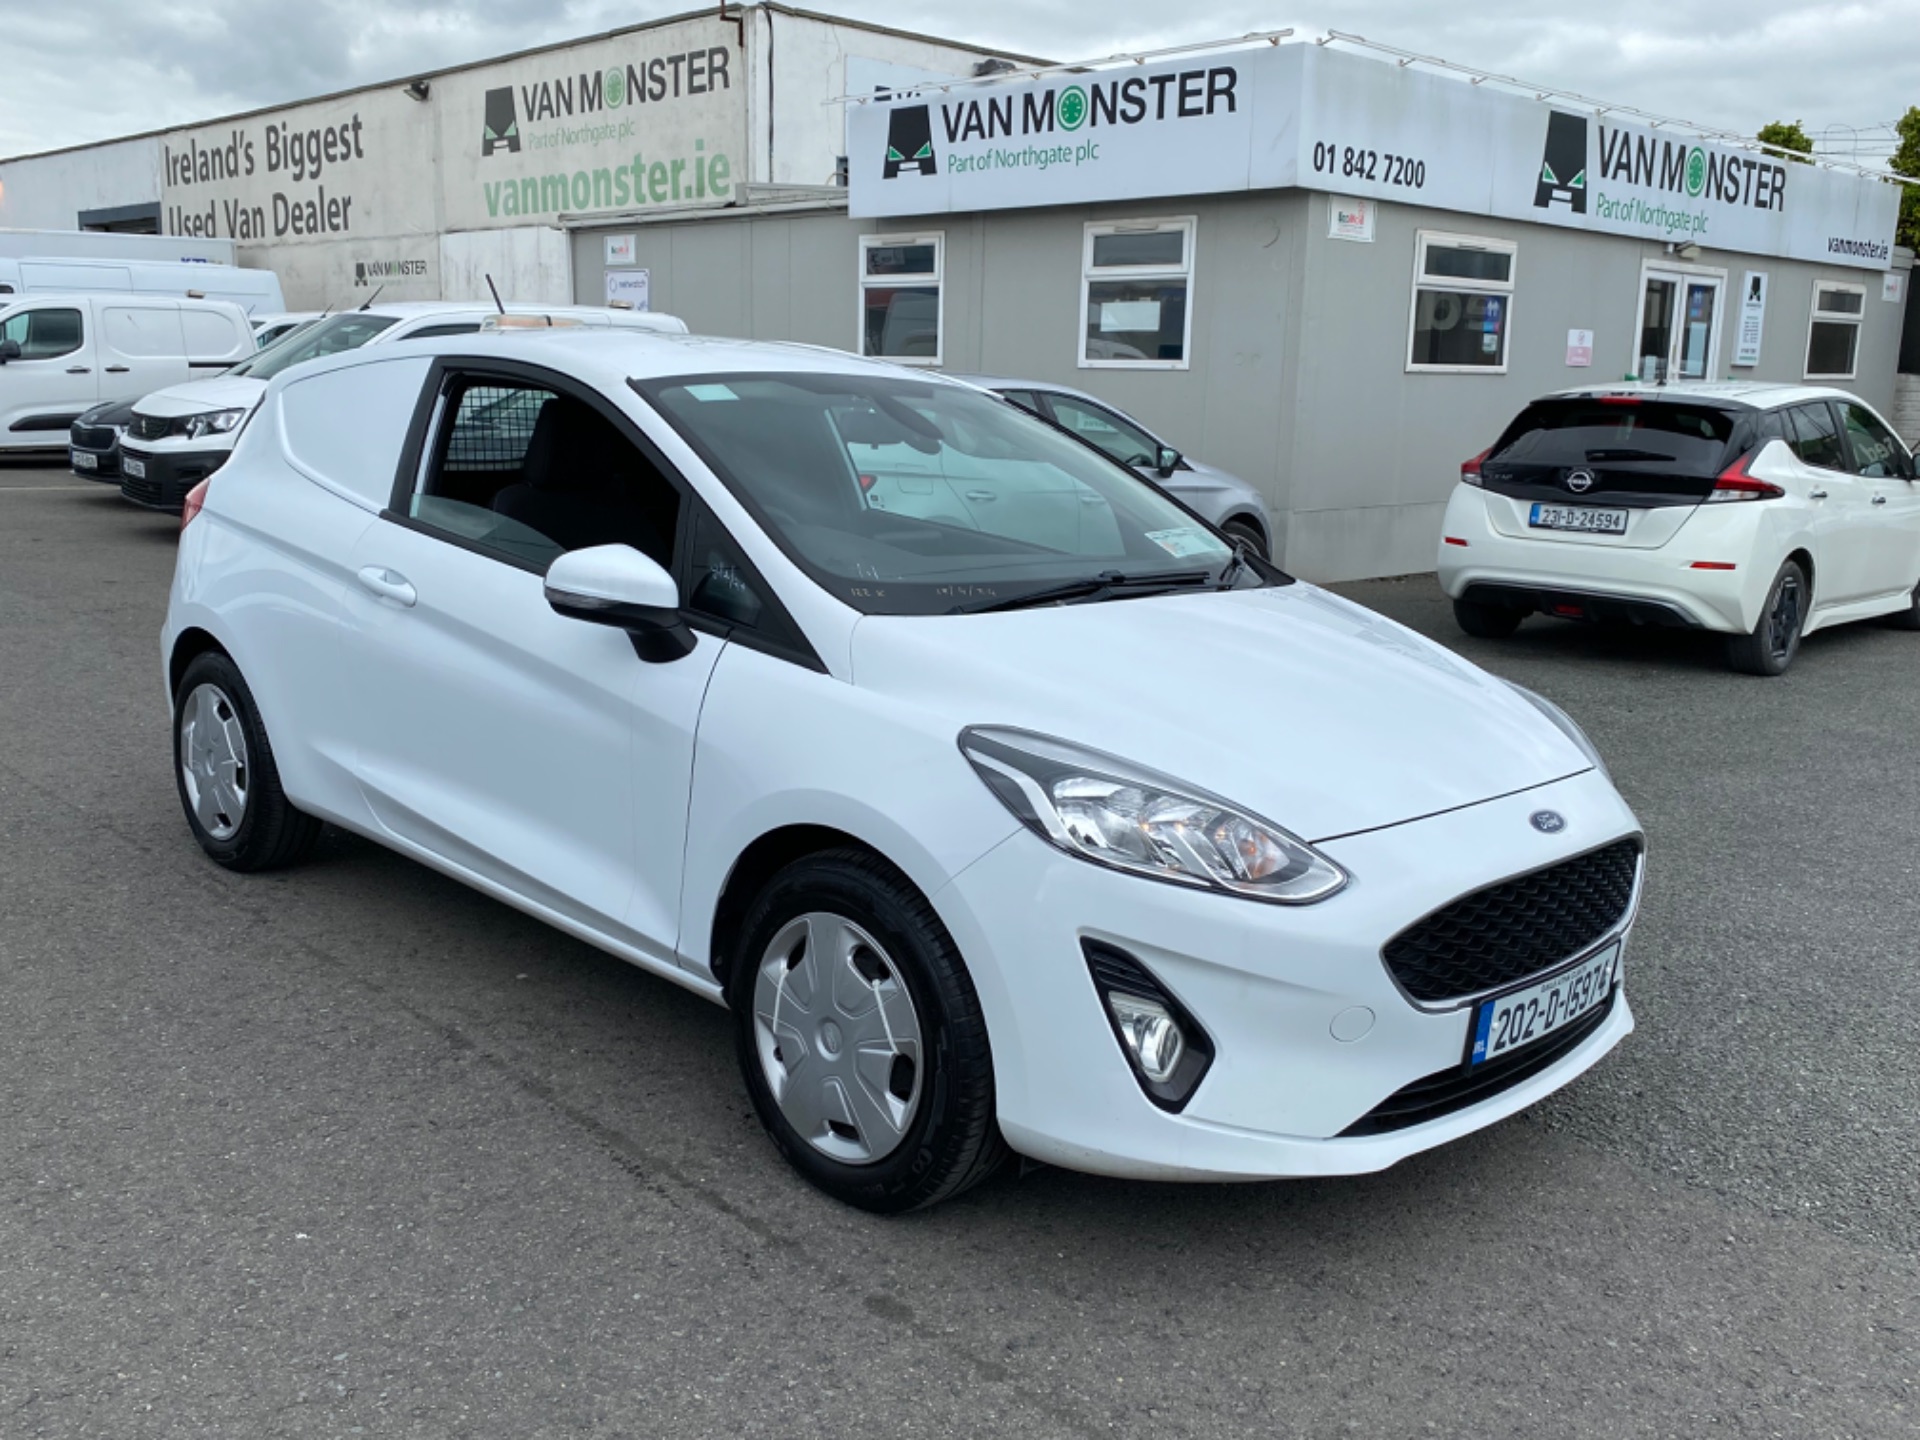 2020 Ford Fiesta Trend 1.5TD 85PS M6 3DR 2DR (202D15974)